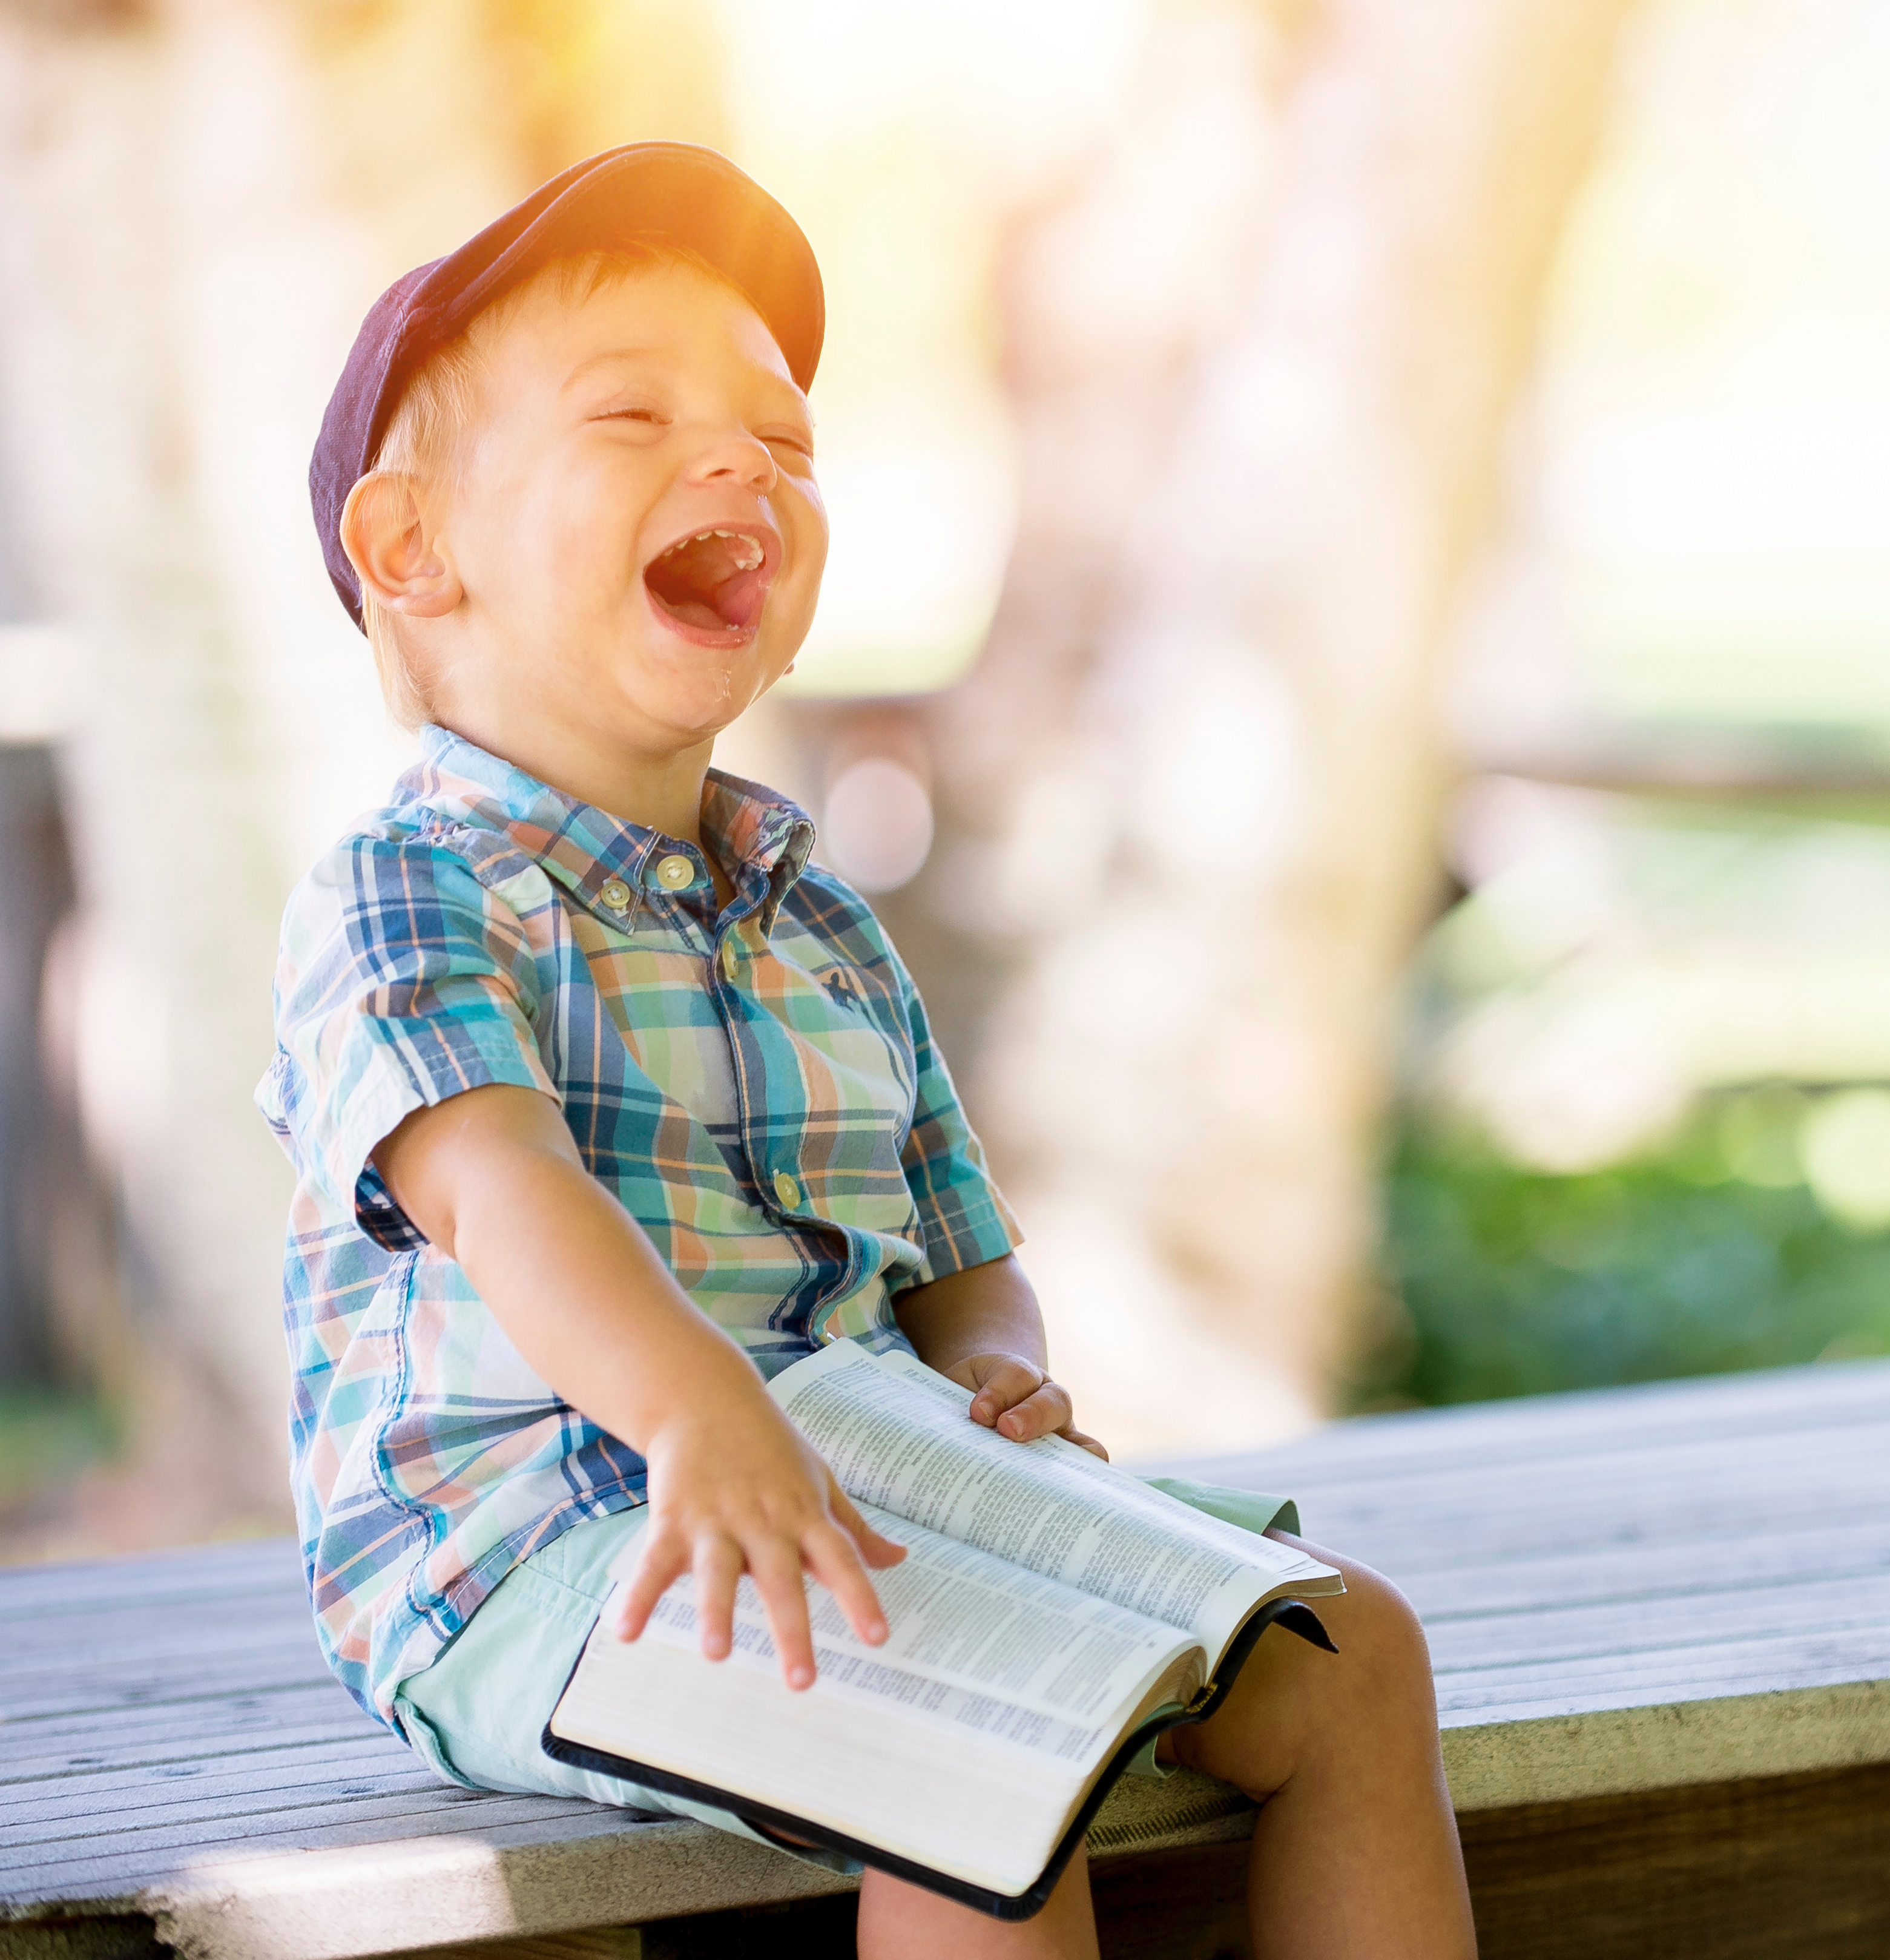 An image of a child, reading and laughing, outdoors